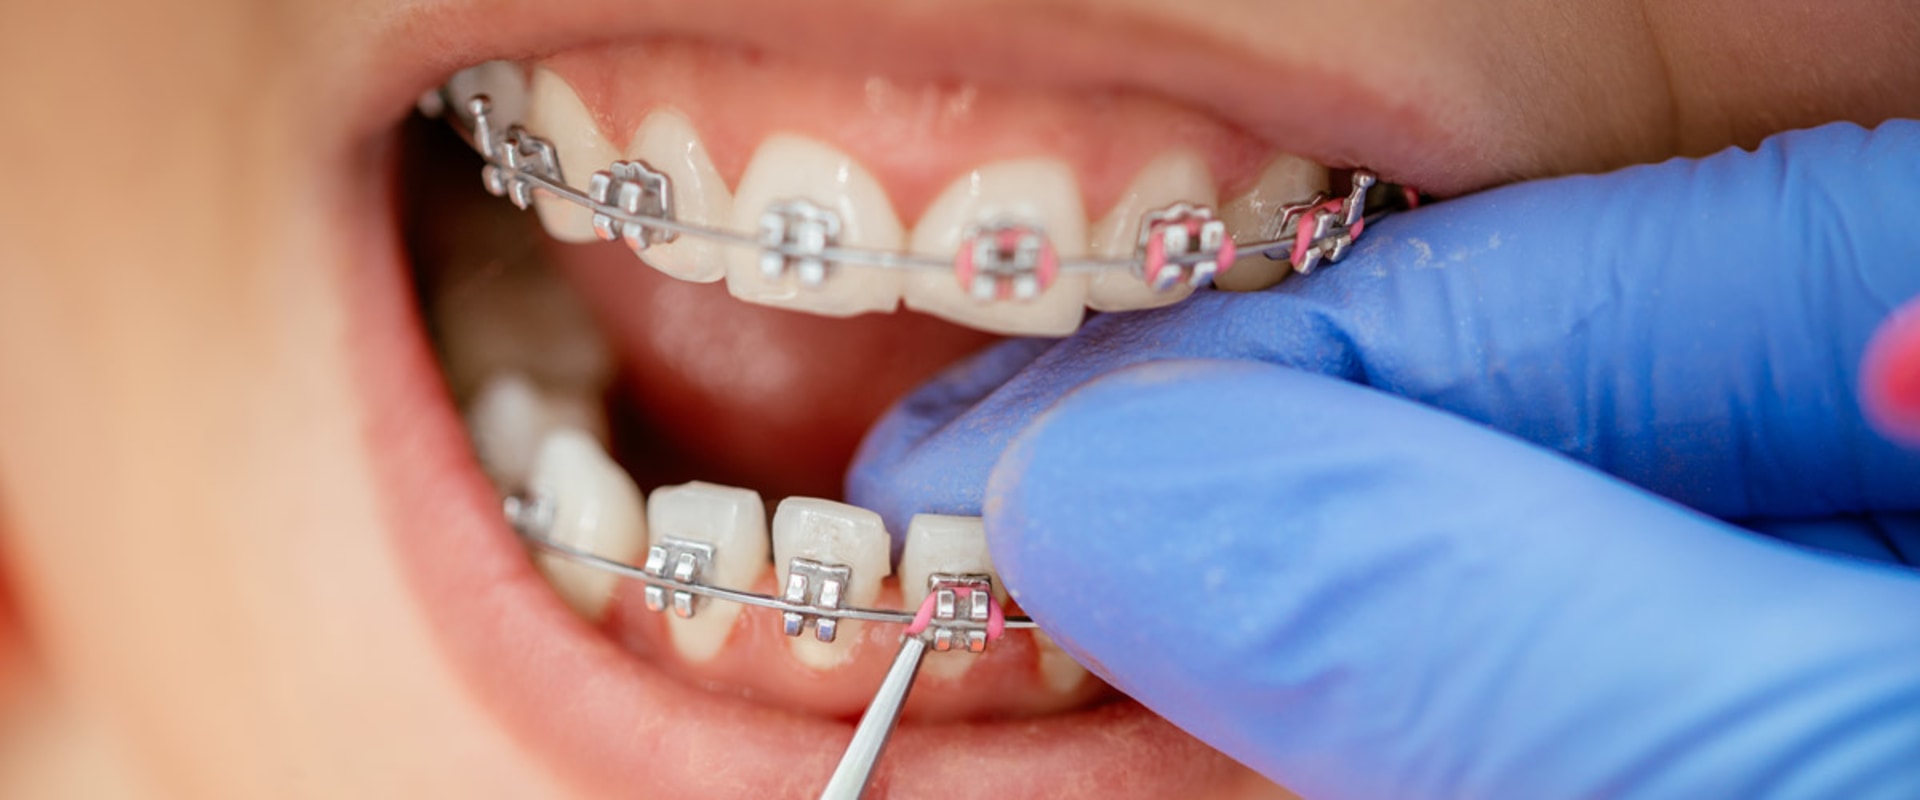 Steps for Getting Orthodontic Treatment